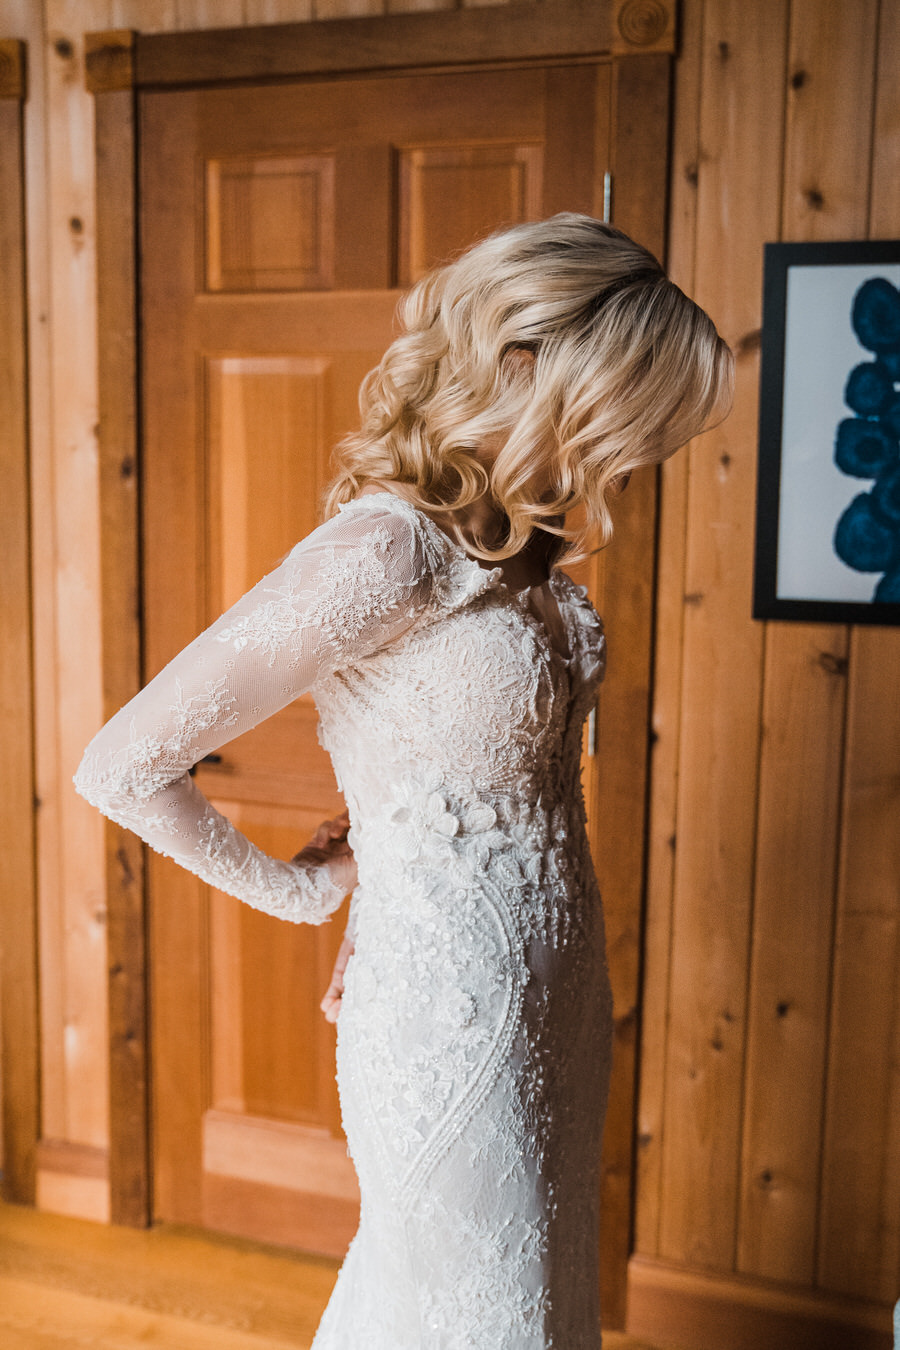 A bride zips up the back of her long-sleeved lace wedding gown